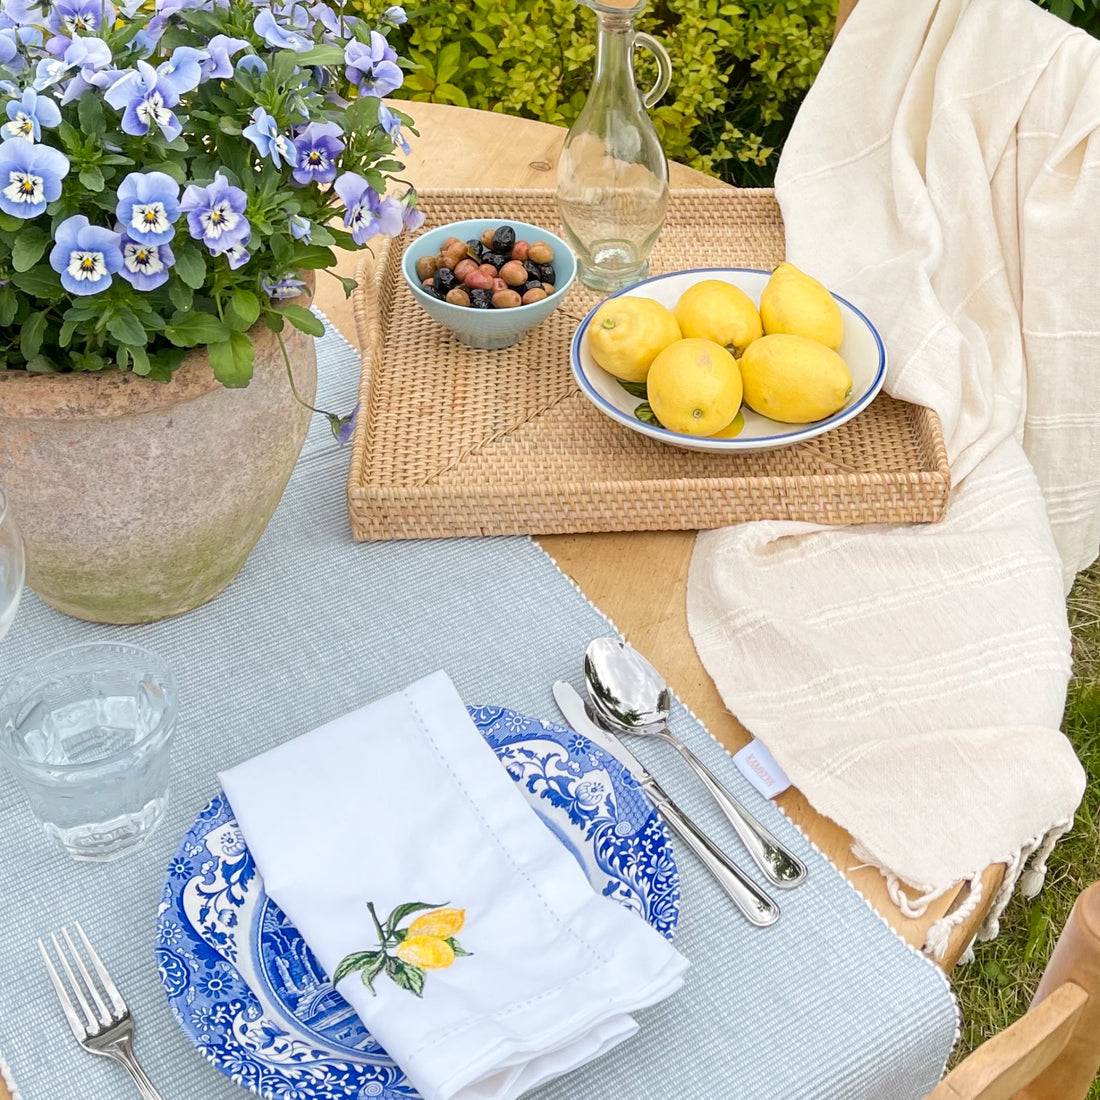 How to style an Amalfi inspired table